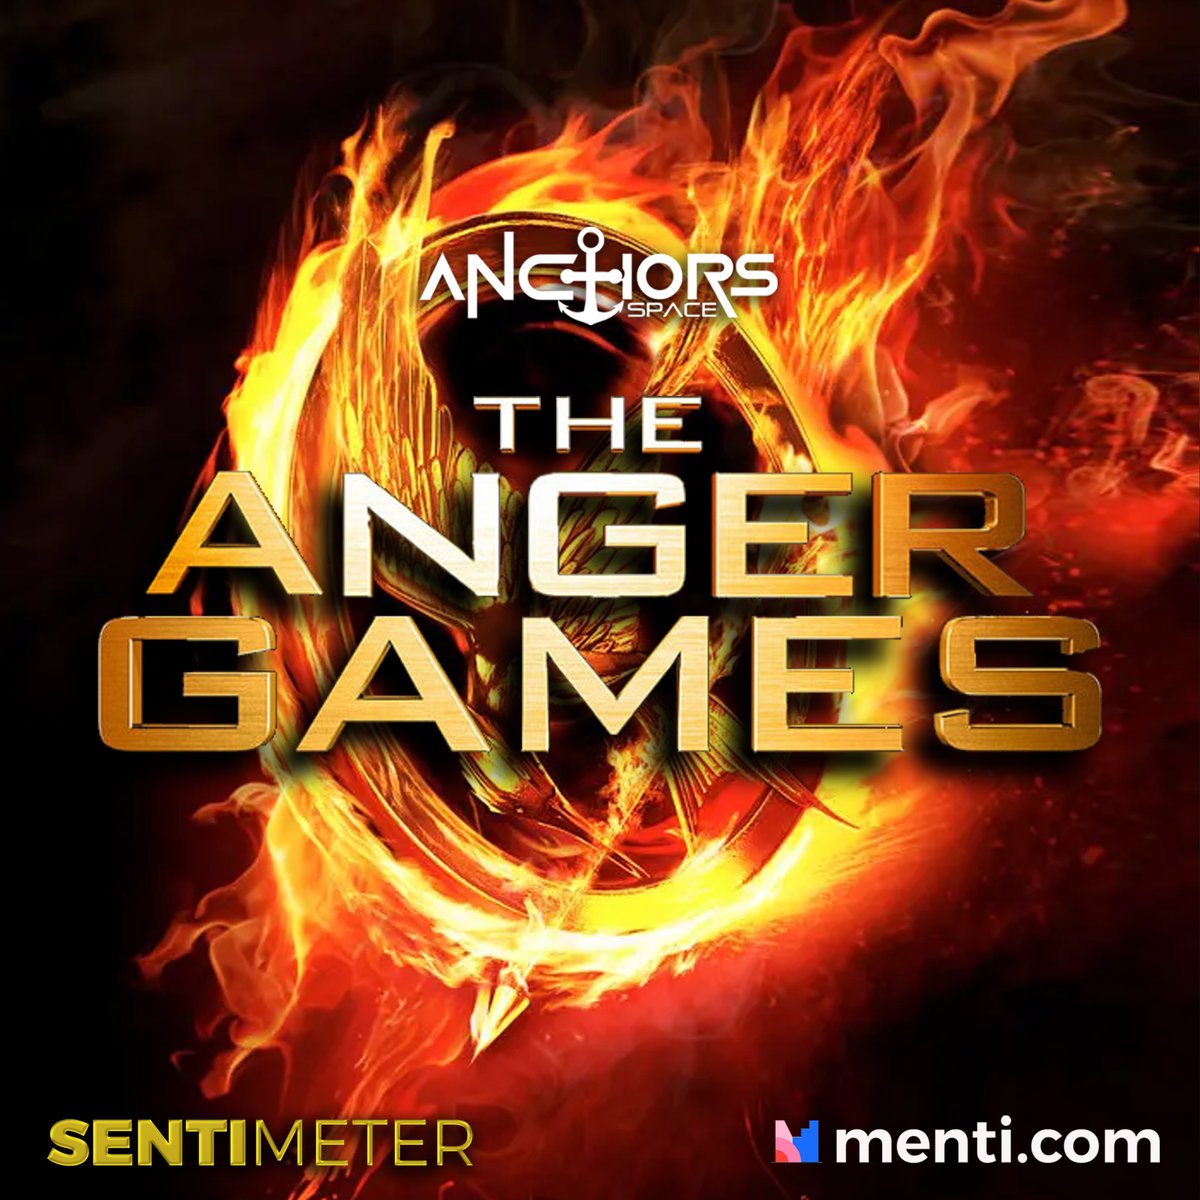 Anchors' are you ready to play? (Anger-METER)

Tune in tonight at 6pm via Twitter space for AnCore’s Memory 4th episode entitled ANGER MANAGEMENT: FINDING YOUR INNER ZEN! 

#AnCoresMemory_Ep4 
#AngerManagement 
#RestInSpace
#AnchorsSpace